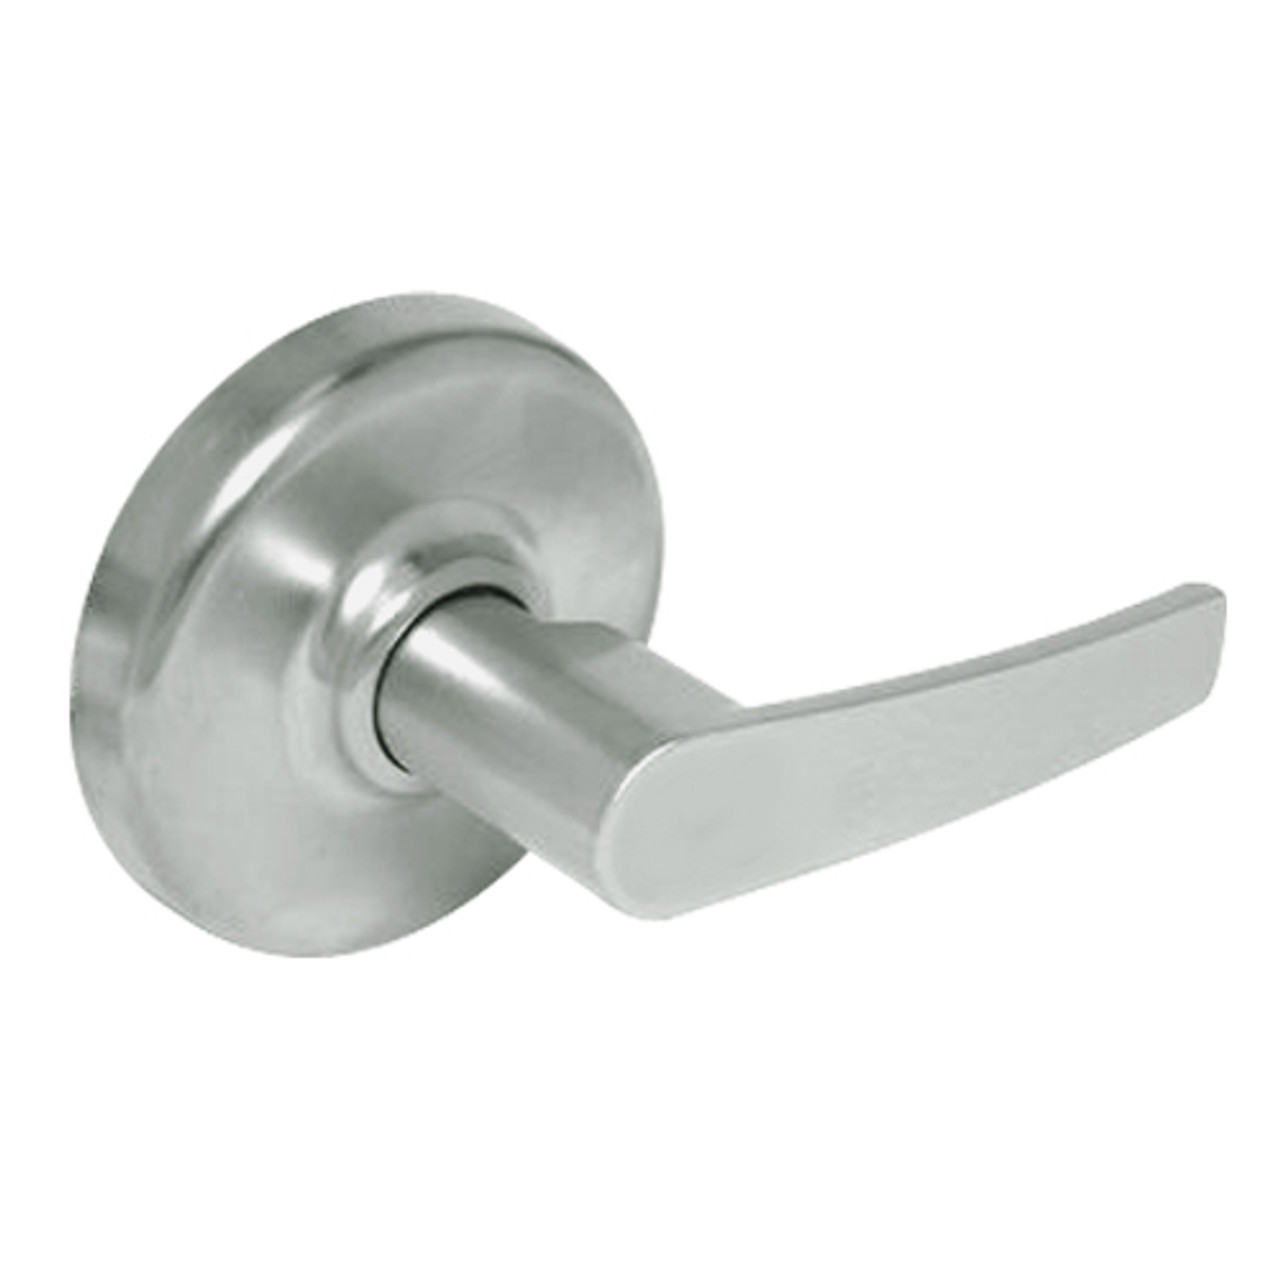 CL3380-AZD-619 Corbin CL3300 Series Extra Heavy Duty Passage with Blank Plate Cylindrical Locksets with Armstrong Lever in Satin Nickel Plated Finish